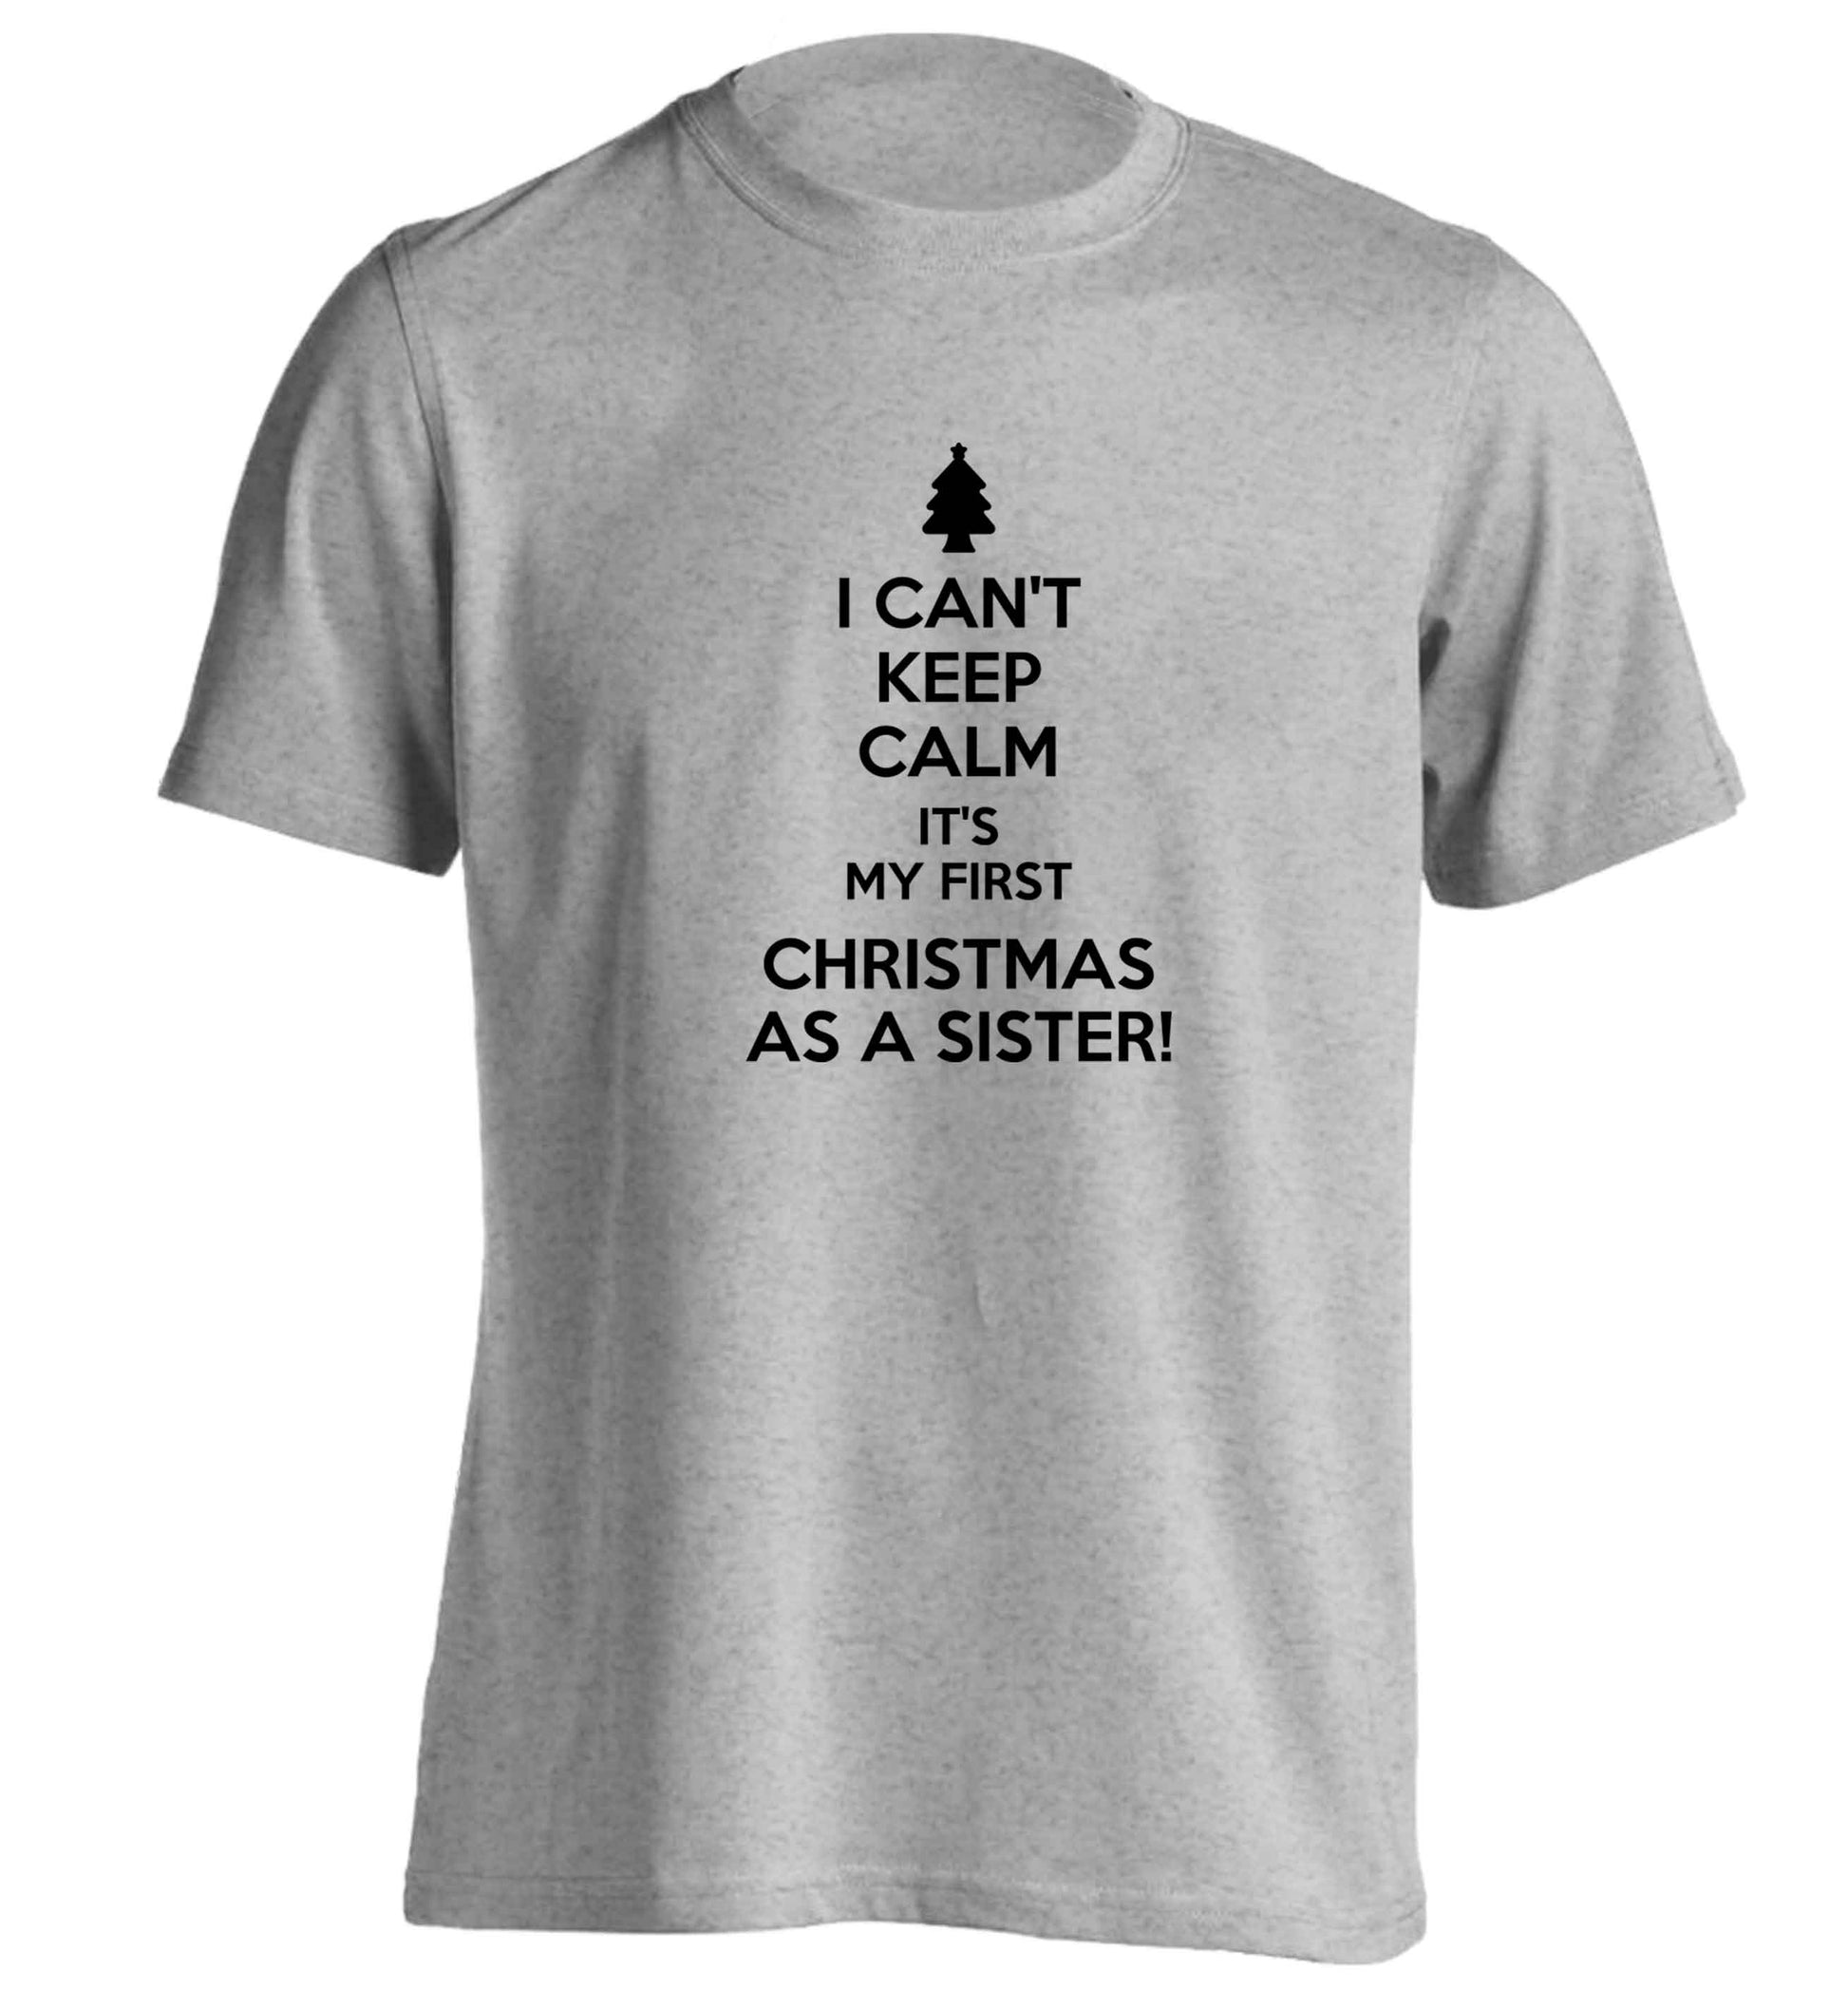 I can't keep calm it's my first Christmas as a sister! adults unisex grey Tshirt 2XL